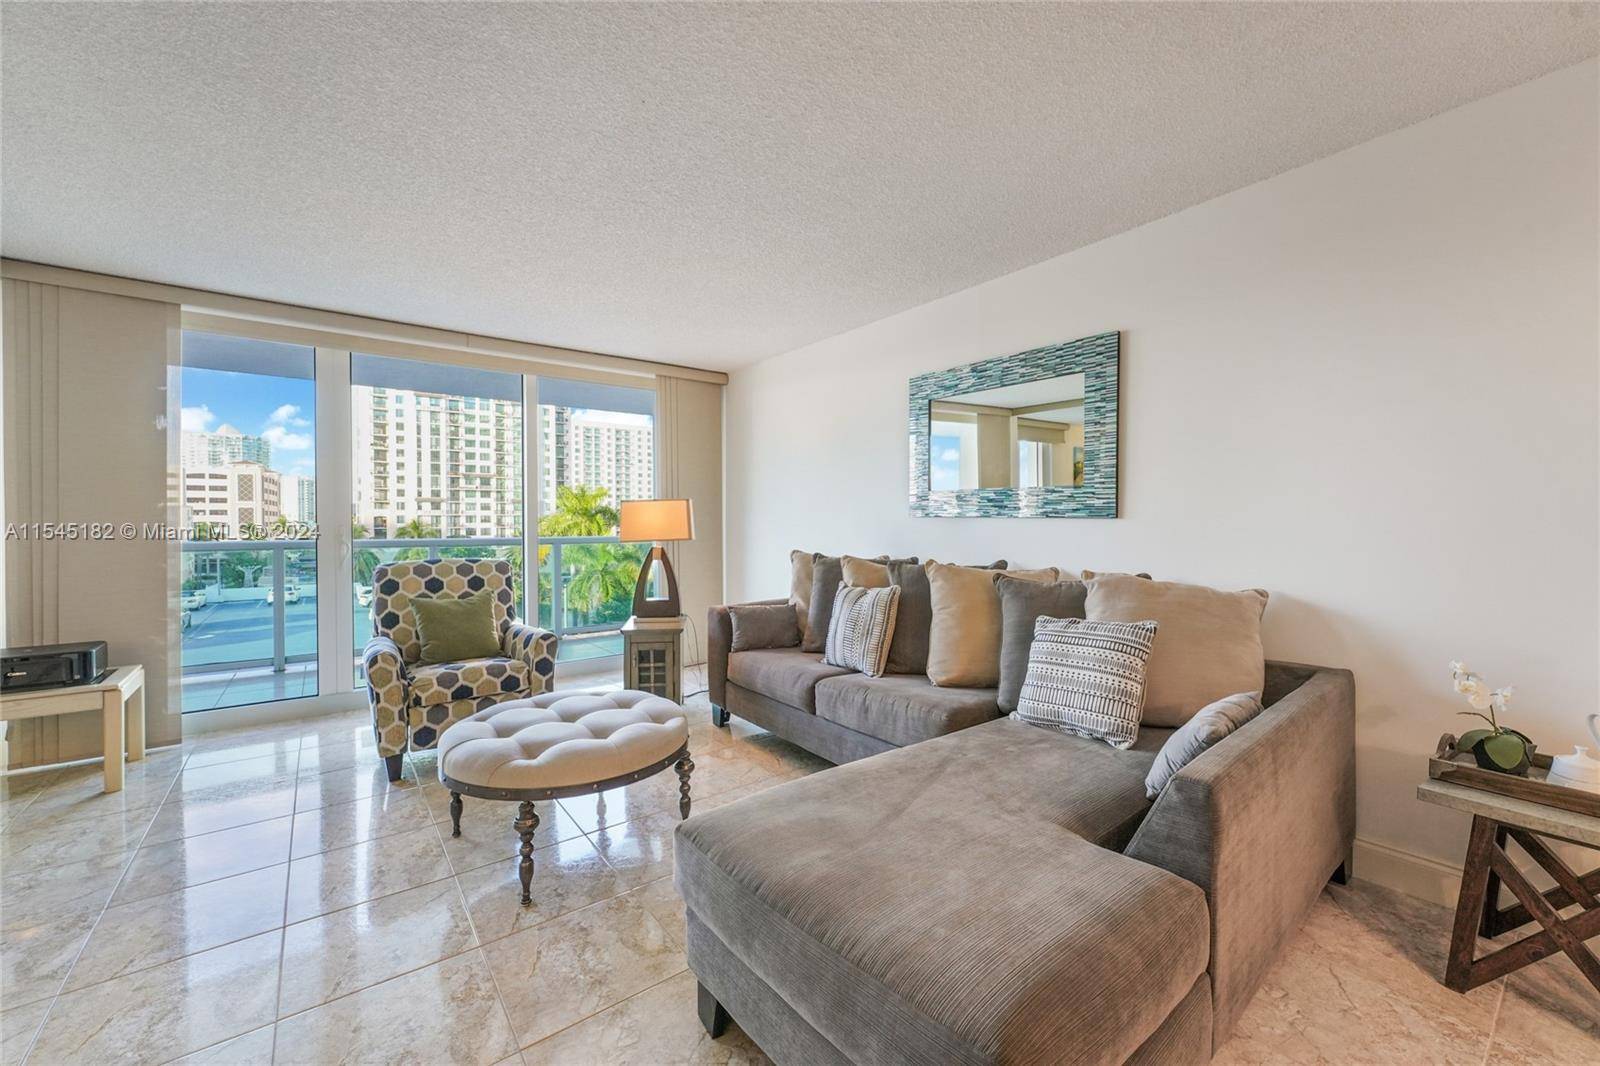 Embrace a sophisticated lifestyle at Arlen House at Sunny Isles Beach, situated on the famous Collins Ave.